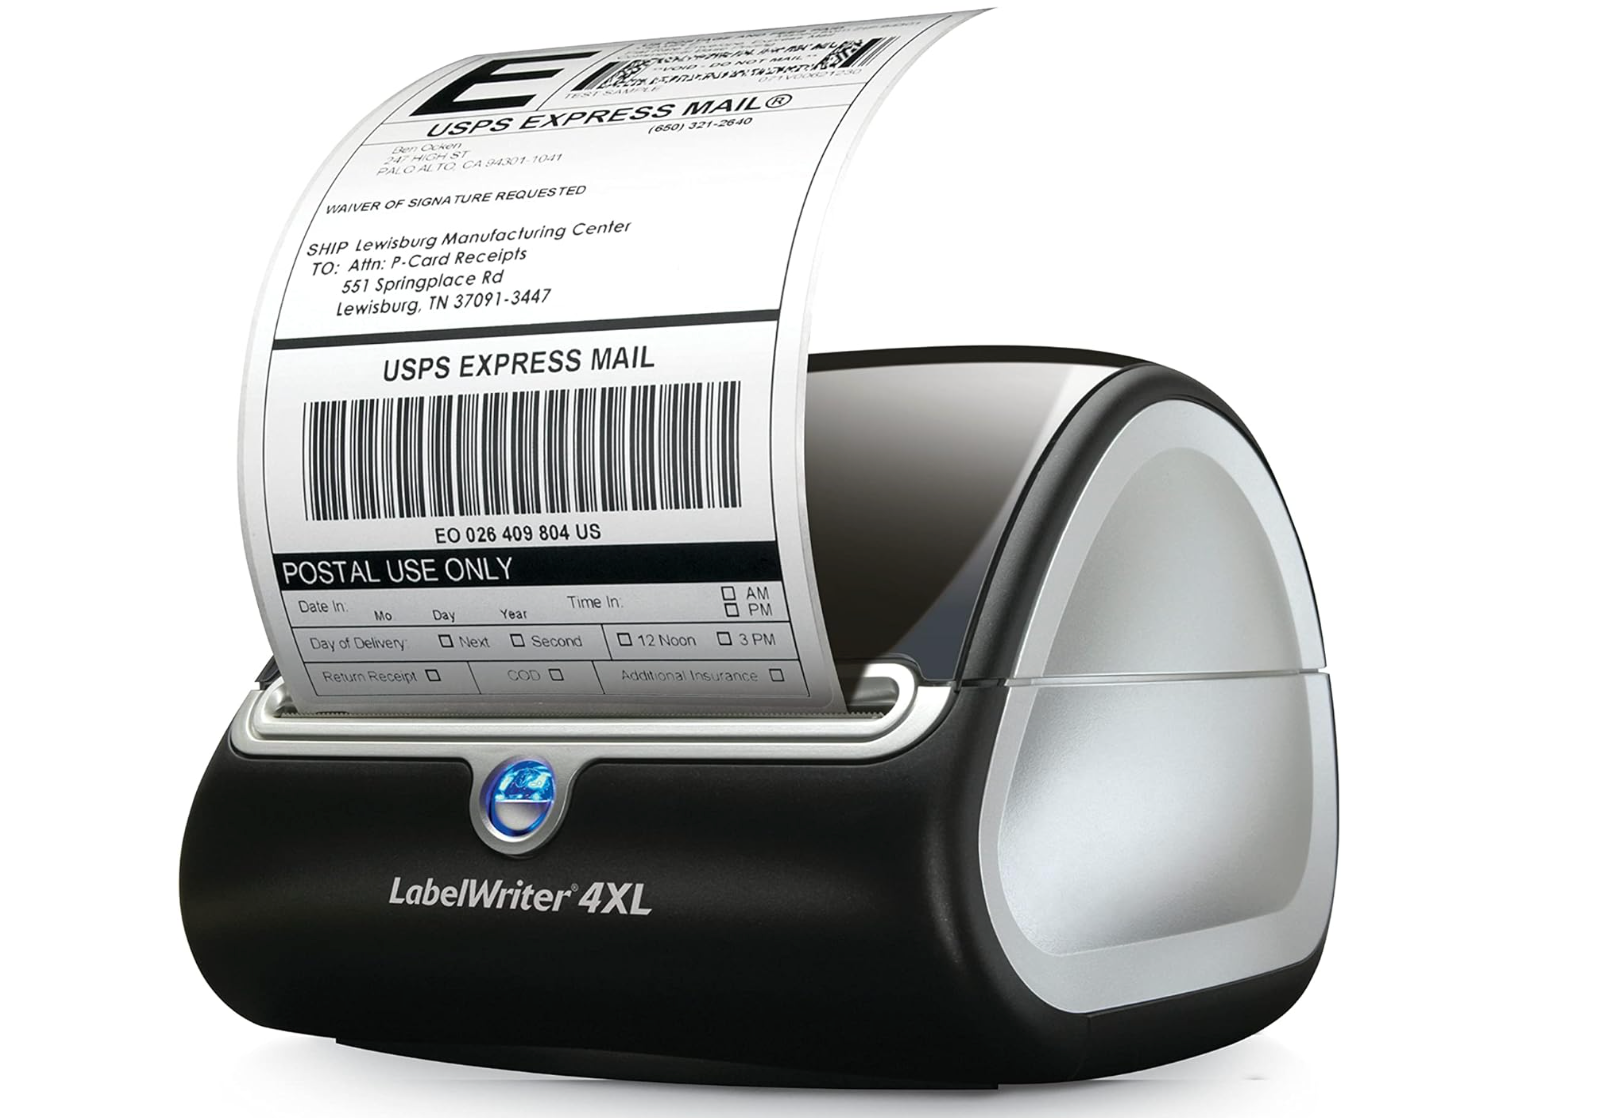 Image of the LabelWriter 4XL by DYMO